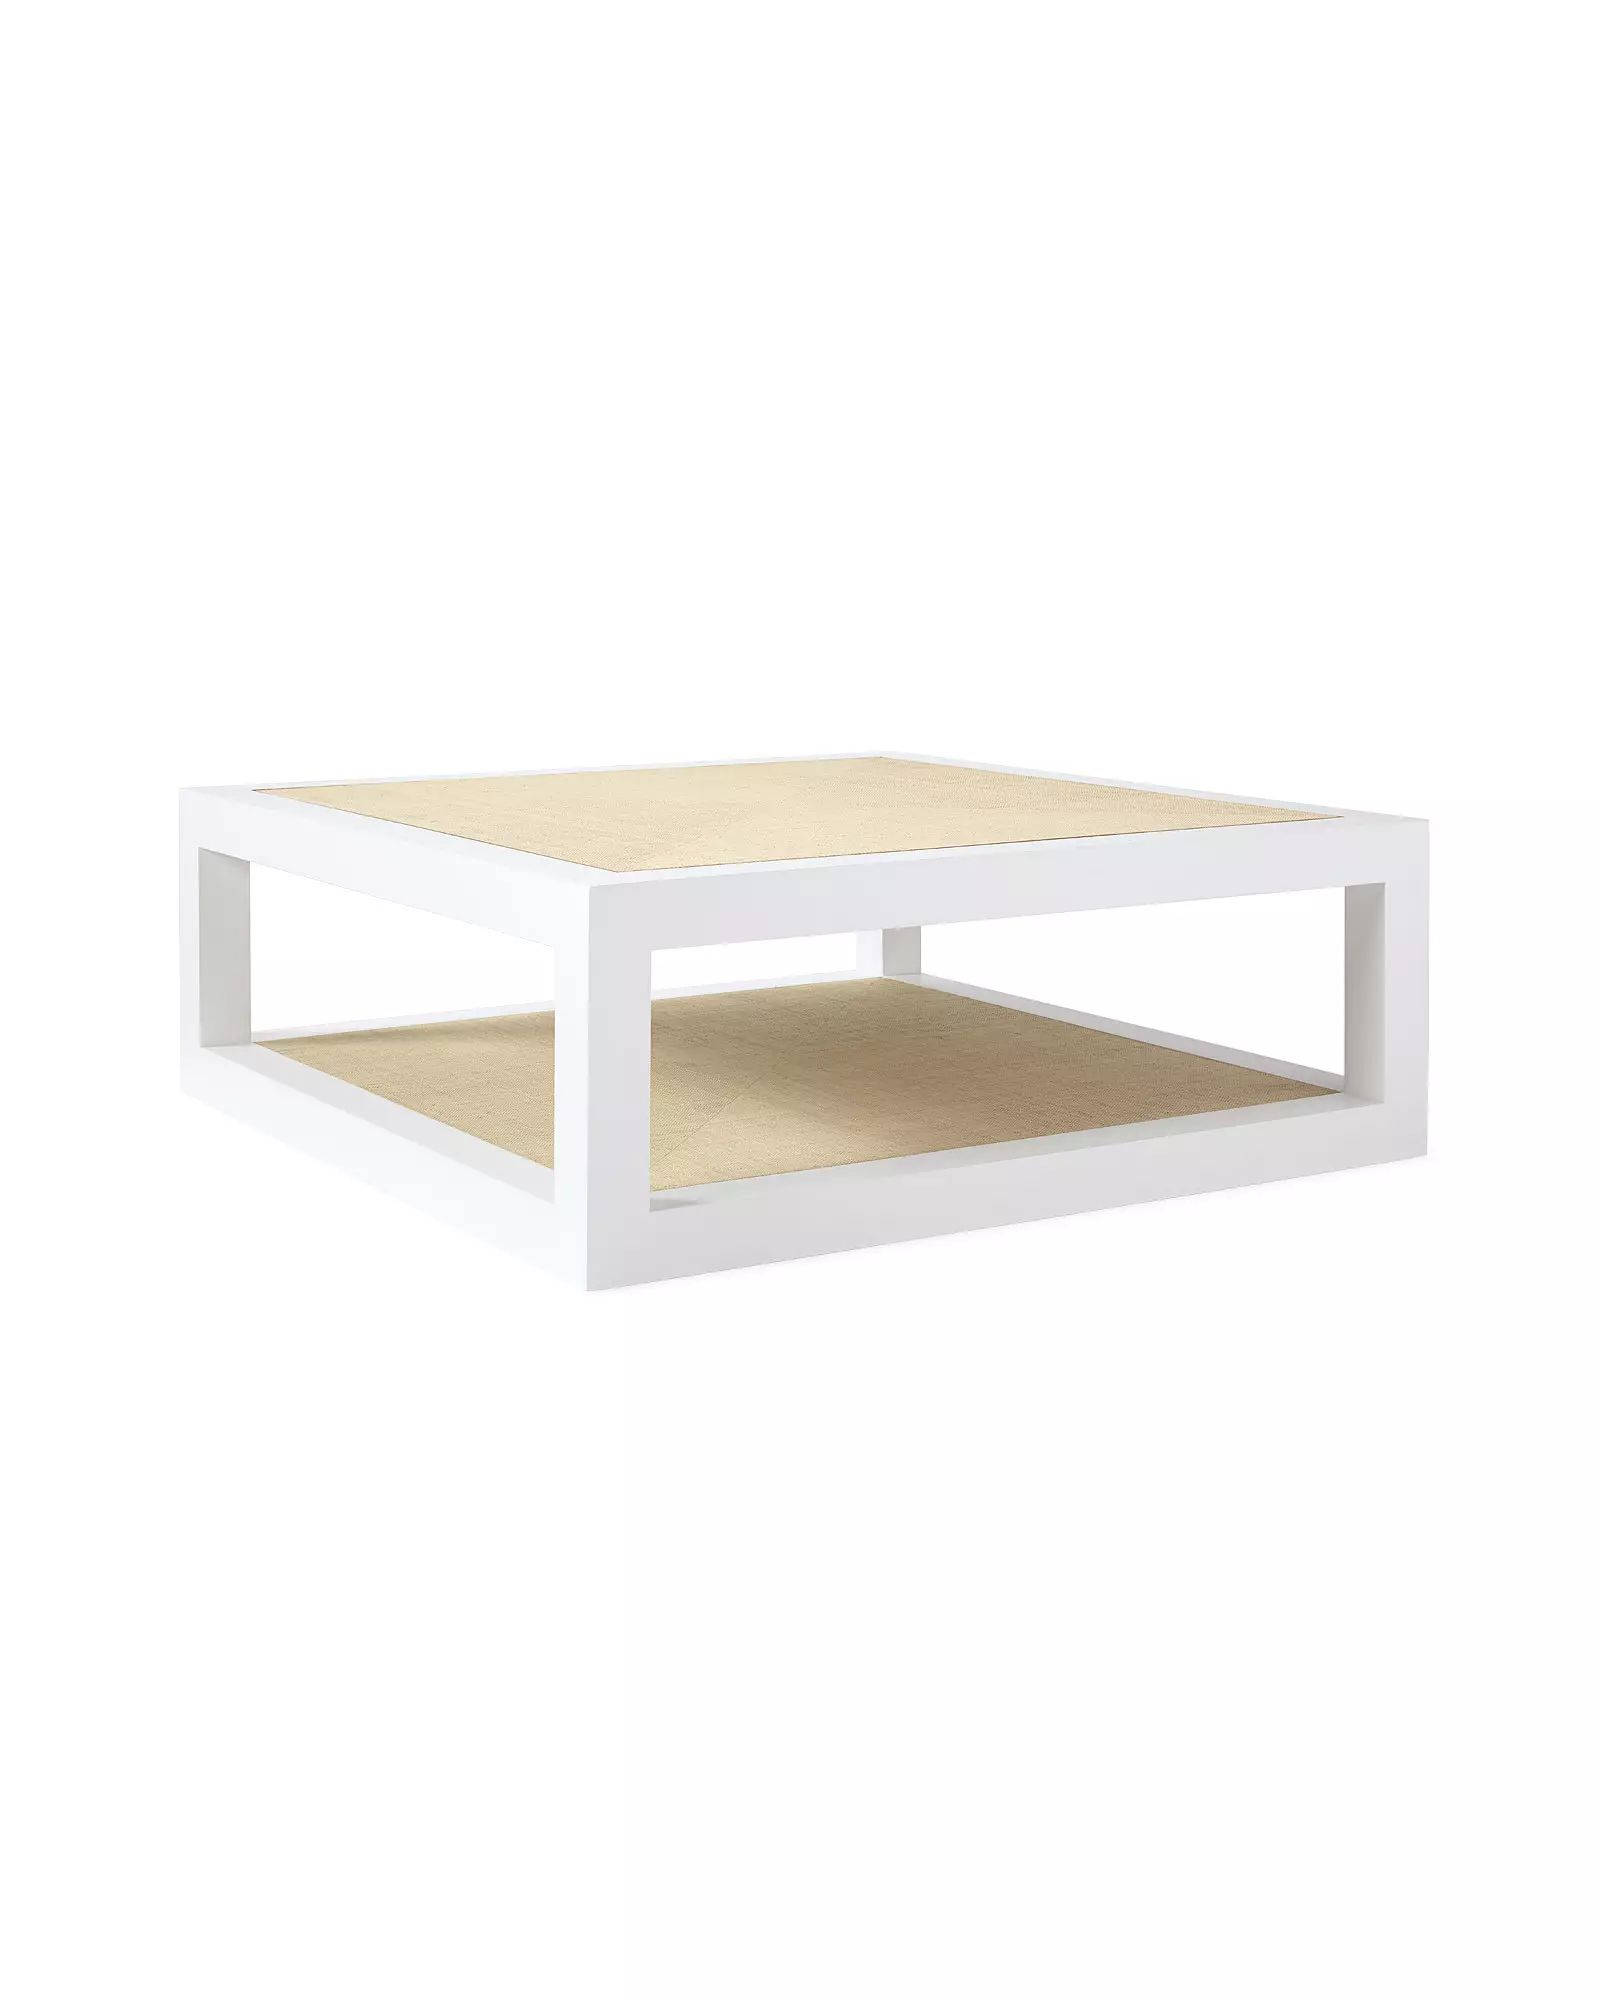 Mercer Coffee Table | Serena and Lily